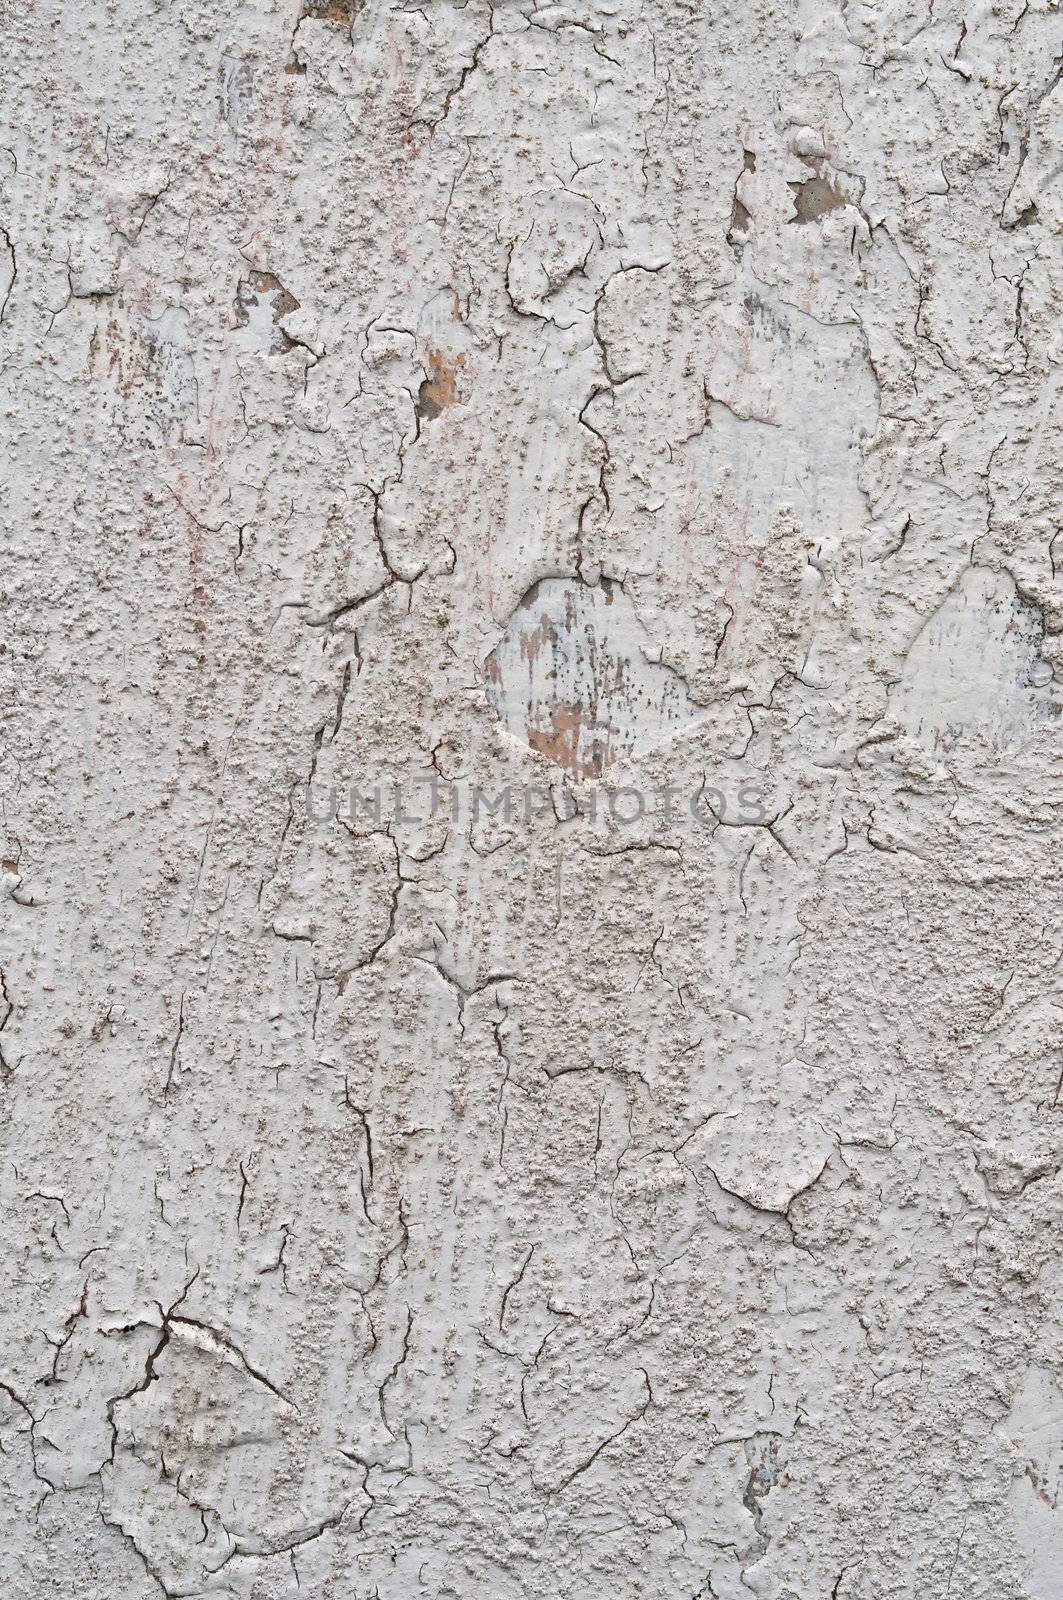 Weathered surface of a building wall as grunge grey background